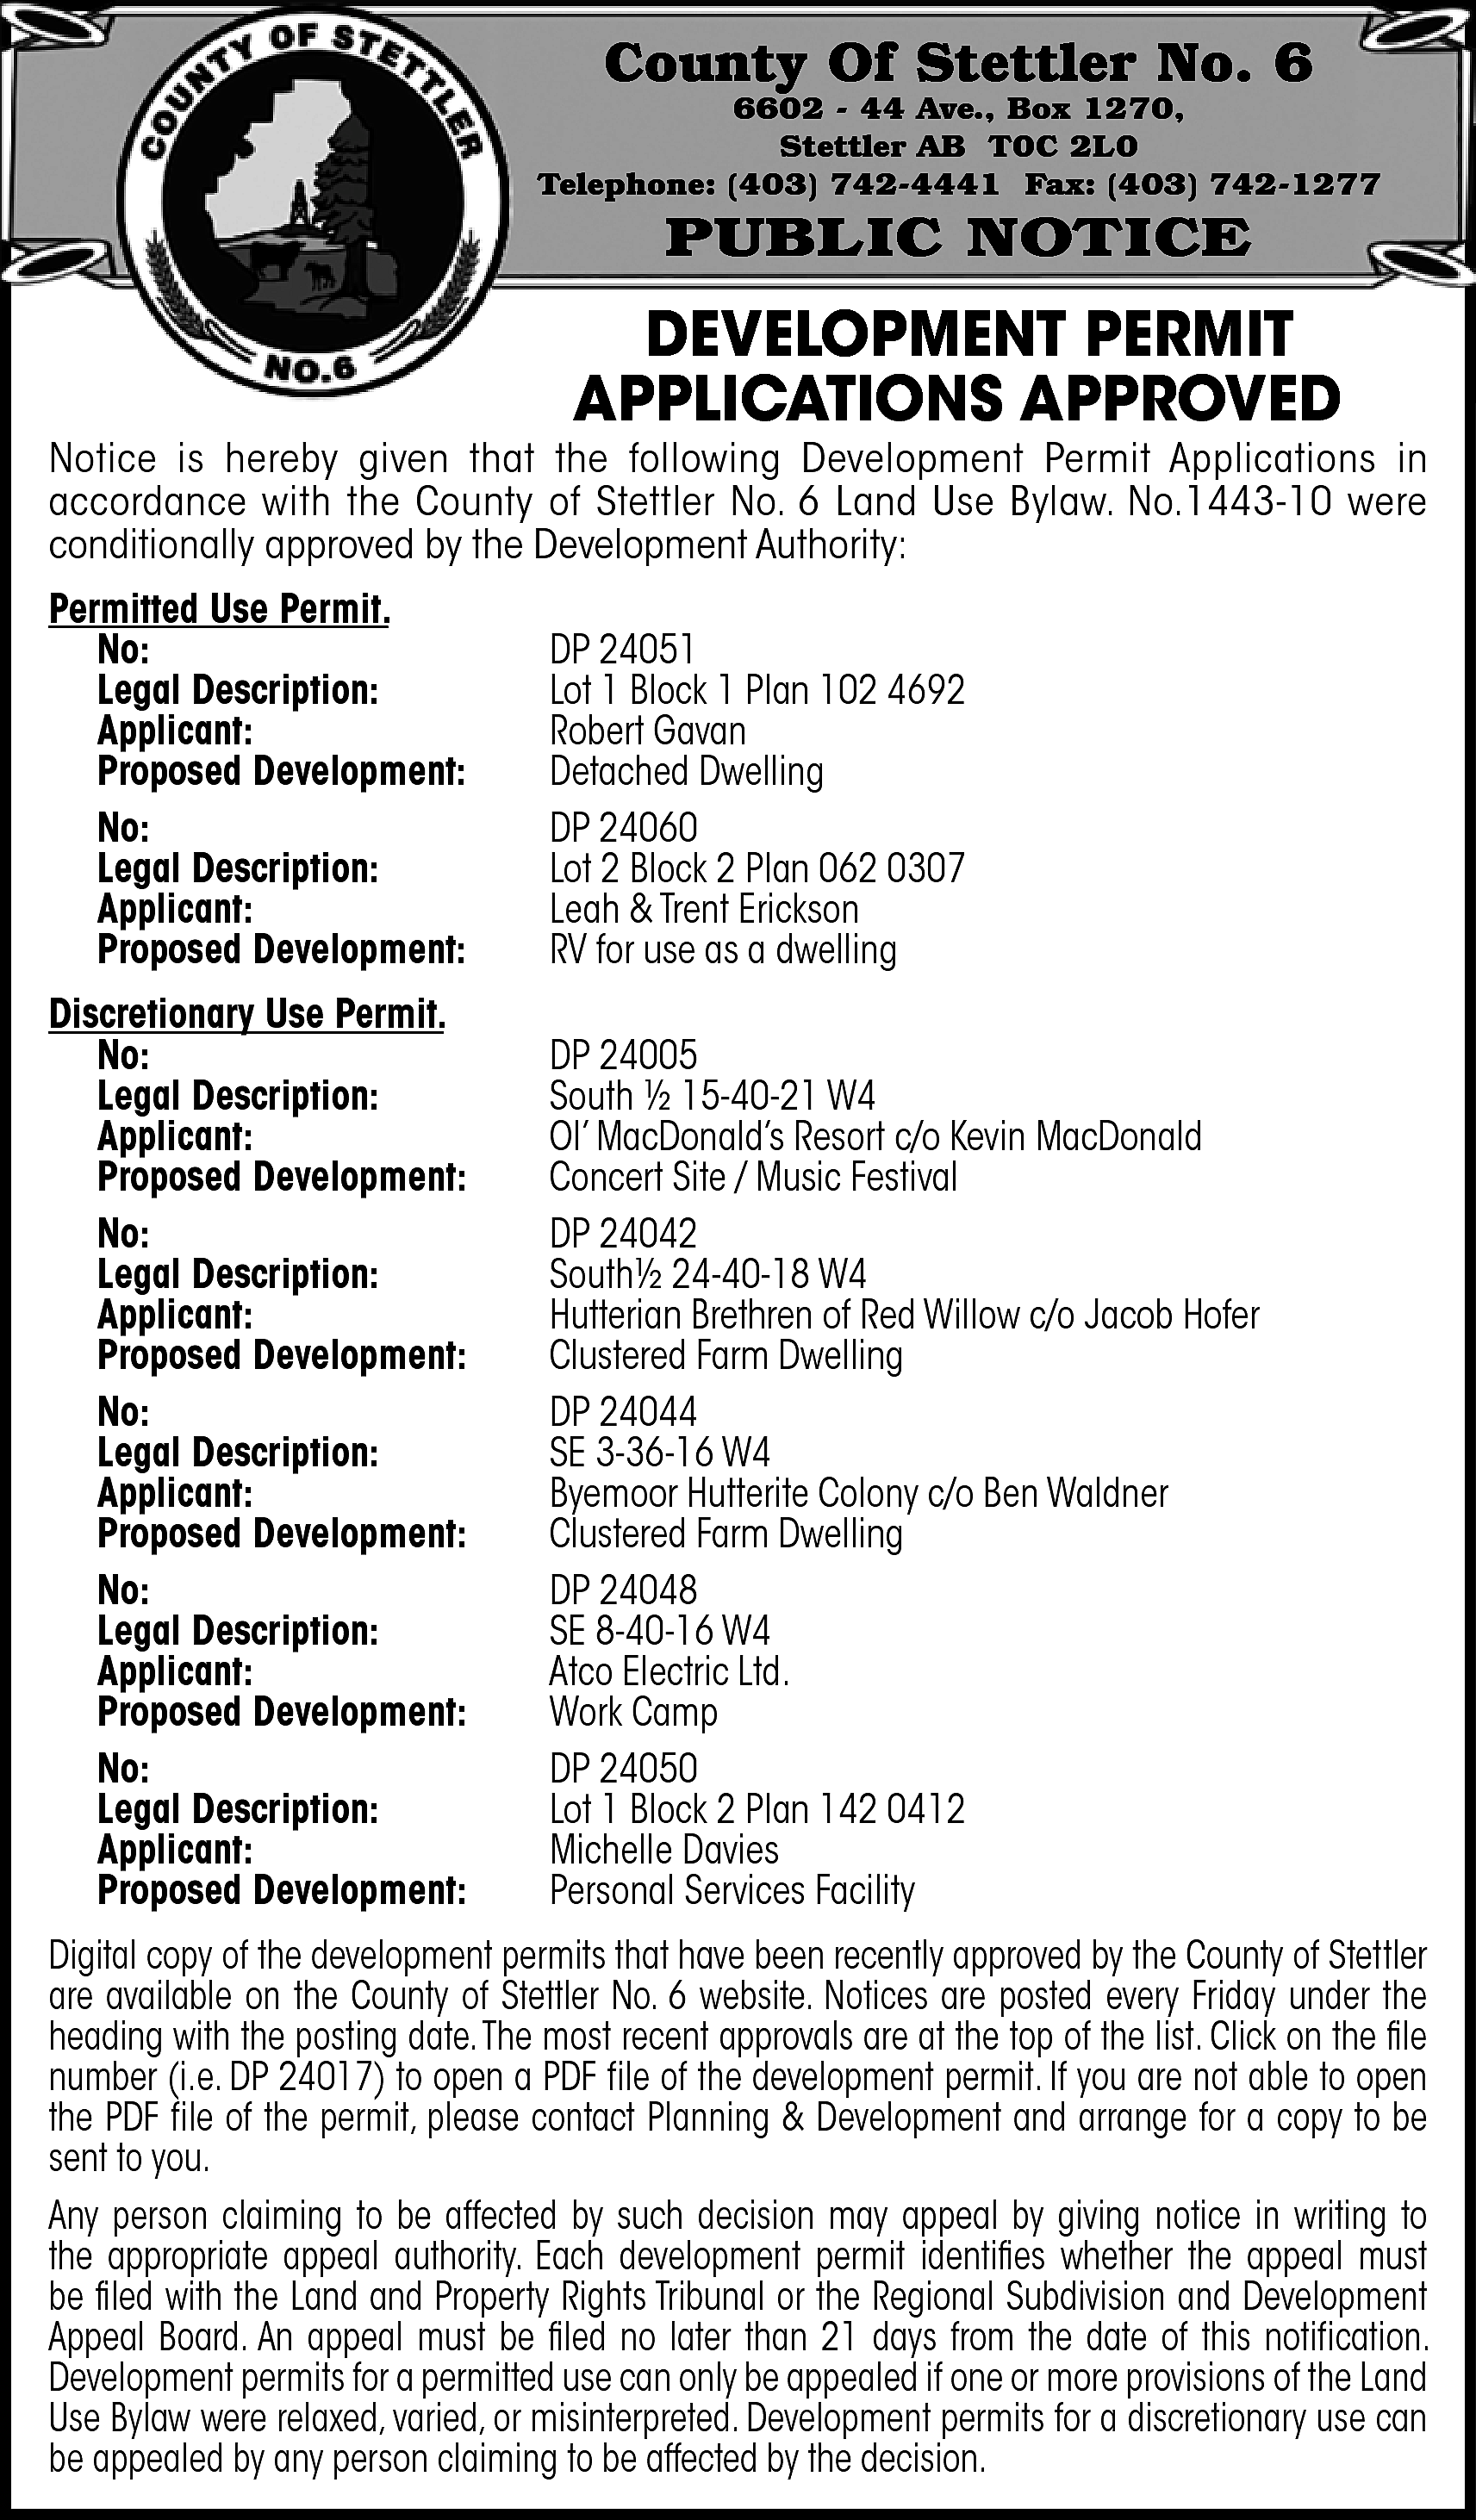 County Of Stettler No. 6  County Of Stettler No. 6    6602 - 44 Ave., Box 1270,  Stettler AB T0C 2L0  Telephone: (403) 742-4441 Fax: (403) 742-1277    PUBLIC NOTICE    DEVELOPMENT PERMIT  APPLICATIONS APPROVED    Notice is hereby given that the following Development Permit Applications in  accordance with the County of Stettler No. 6 Land Use Bylaw. No.1443-10 were  conditionally approved by the Development Authority:  Permitted Use Permit.  No:  Legal Description:  Applicant:  Proposed Development:  No:  Legal Description:  Applicant:  Proposed Development:    DP 24051  Lot 1 Block 1 Plan 102 4692  Robert Gavan  Detached Dwelling  DP 24060  Lot 2 Block 2 Plan 062 0307  Leah & Trent Erickson  RV for use as a dwelling    Discretionary Use Permit.  No:  Legal Description:  Applicant:  Proposed Development:  No:  Legal Description:  Applicant:  Proposed Development:  No:  Legal Description:  Applicant:  Proposed Development:  No:  Legal Description:  Applicant:  Proposed Development:  No:  Legal Description:  Applicant:  Proposed Development:    DP 24005  South ½ 15-40-21 W4  Ol’ MacDonald’s Resort c/o Kevin MacDonald  Concert Site / Music Festival  DP 24042  South½ 24-40-18 W4  Hutterian Brethren of Red Willow c/o Jacob Hofer  Clustered Farm Dwelling  DP 24044  SE 3-36-16 W4  Byemoor Hutterite Colony c/o Ben Waldner  Clustered Farm Dwelling  DP 24048  SE 8-40-16 W4  Atco Electric Ltd.  Work Camp  DP 24050  Lot 1 Block 2 Plan 142 0412  Michelle Davies  Personal Services Facility    Digital copy of the development permits that have been recently approved by the County of Stettler  are available on the County of Stettler No. 6 website. Notices are posted every Friday under the  heading with the posting date.The most recent approvals are at the top of the list. Click on the file  number (i.e. DP 24017) to open a PDF file of the development permit. If you are not able to open  the PDF file of the permit, please contact Planning & Development and arrange for a copy to be  sent to you.  Any person claiming to be affected by such decision may appeal by giving notice in writing to  the appropriate appeal authority. Each development permit identifies whether the appeal must  be filed with the Land and Property Rights Tribunal or the Regional Subdivision and Development  Appeal Board. An appeal must be filed no later than 21 days from the date of this notification.  Development permits for a permitted use can only be appealed if one or more provisions of the Land  Use Bylaw were relaxed, varied, or misinterpreted. Development permits for a discretionary use can  be appealed by any person claiming to be affected by the decision.    